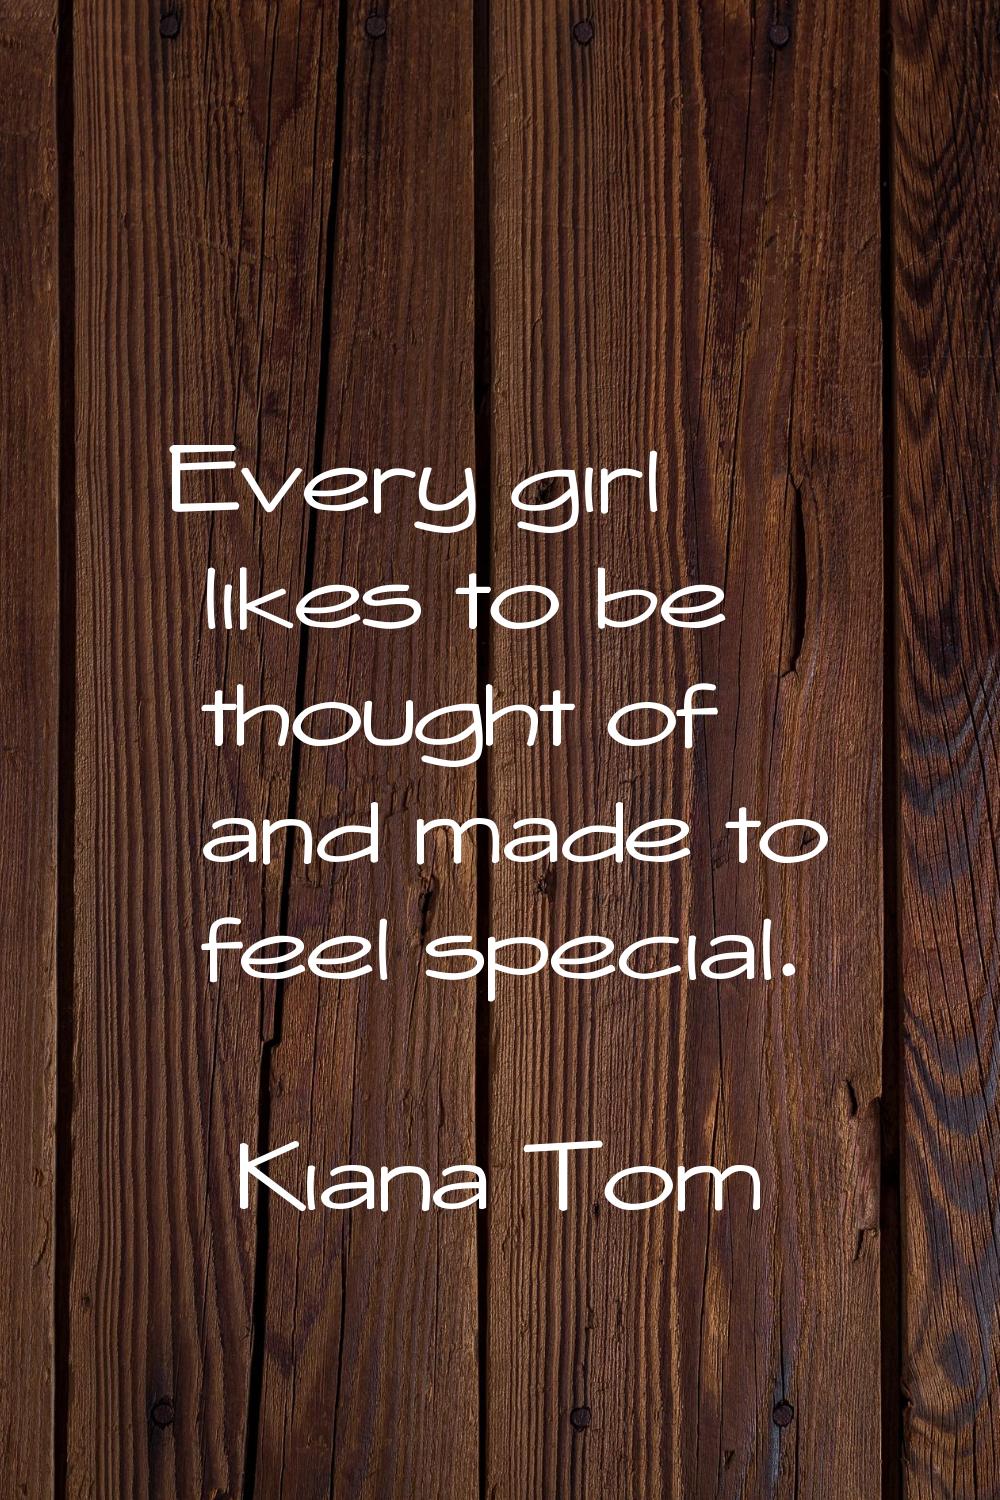 Every girl likes to be thought of and made to feel special.